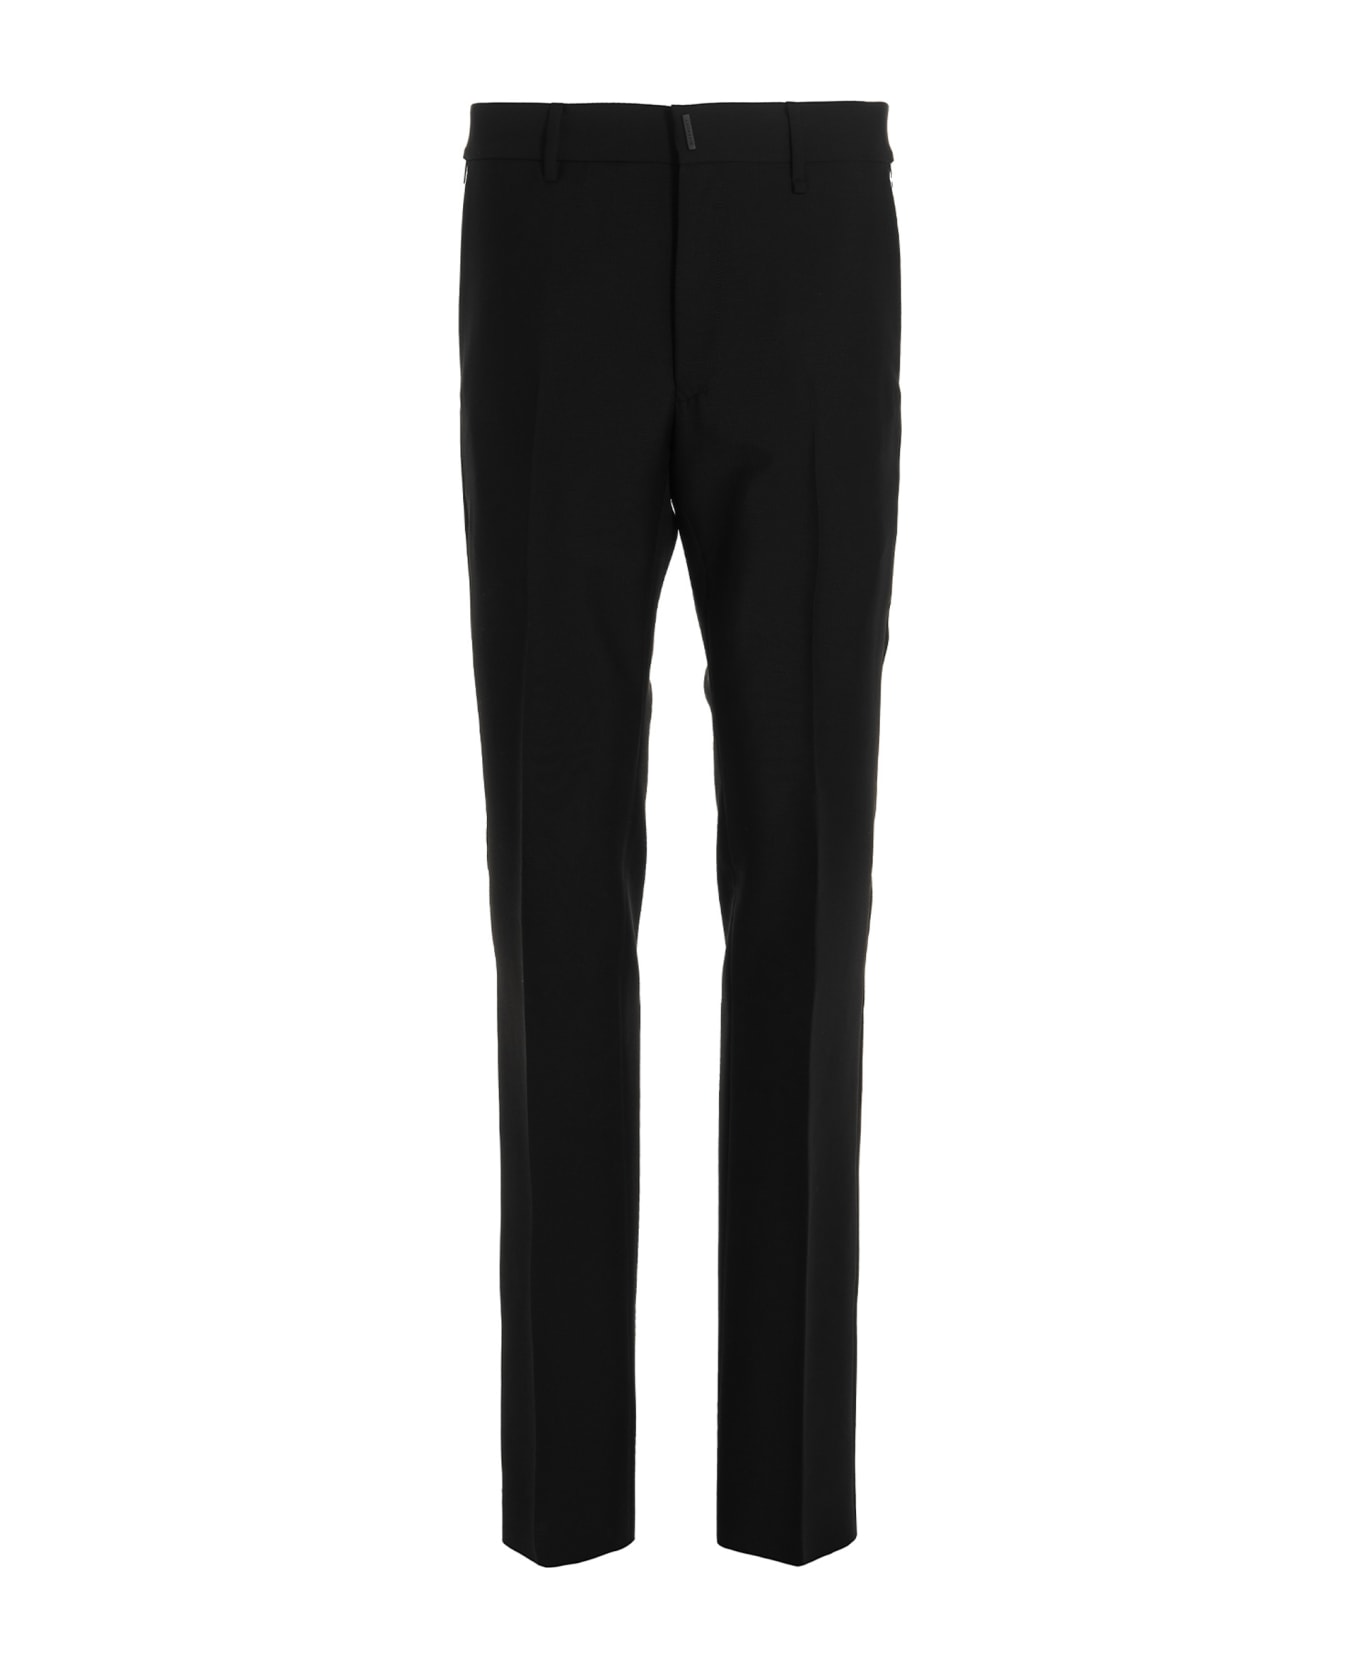 Givenchy Mohair Wool Pants - Nero